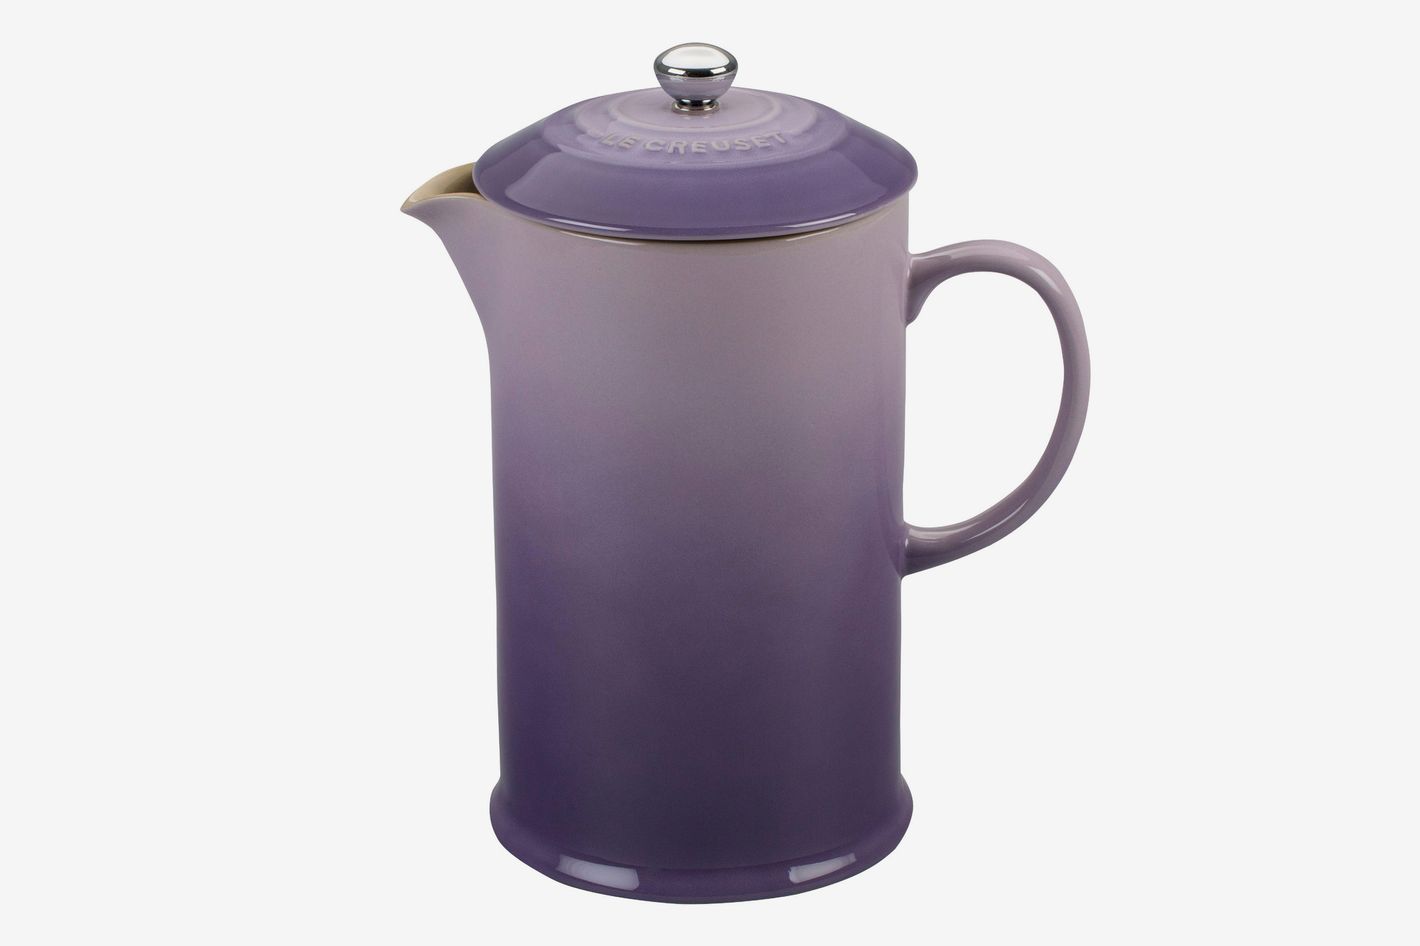 Le Creuset Cookware in Provence on Sale at Nordstrom — 2018 | The ...